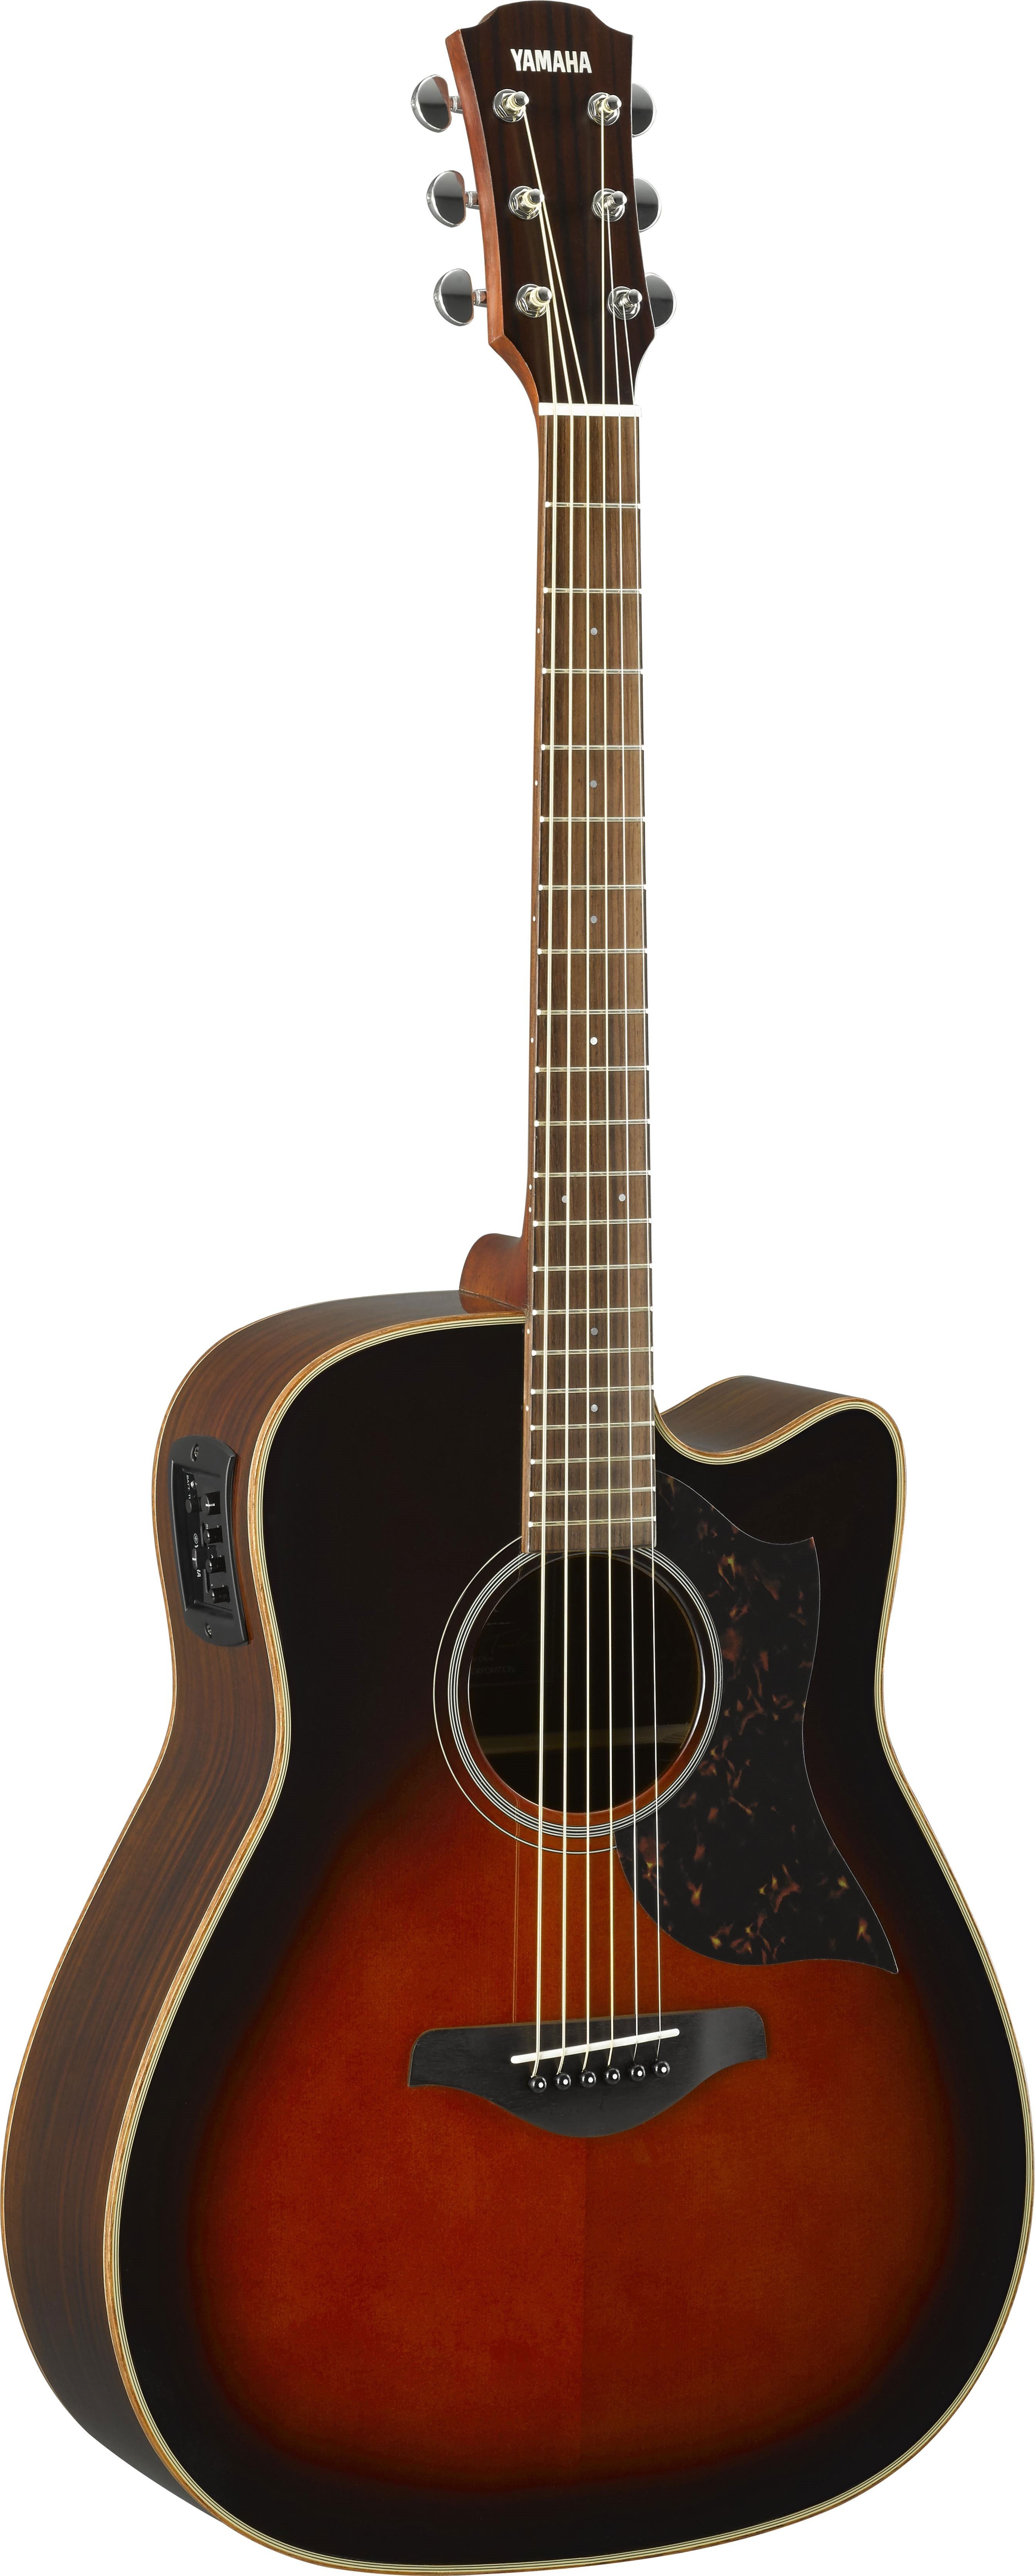 Yamaha A1R Dreadnought Cutaway - Sunburst Acoustic-Electric Guitar, Sitka Spruce Top, Rosewood Back and Sides for sale